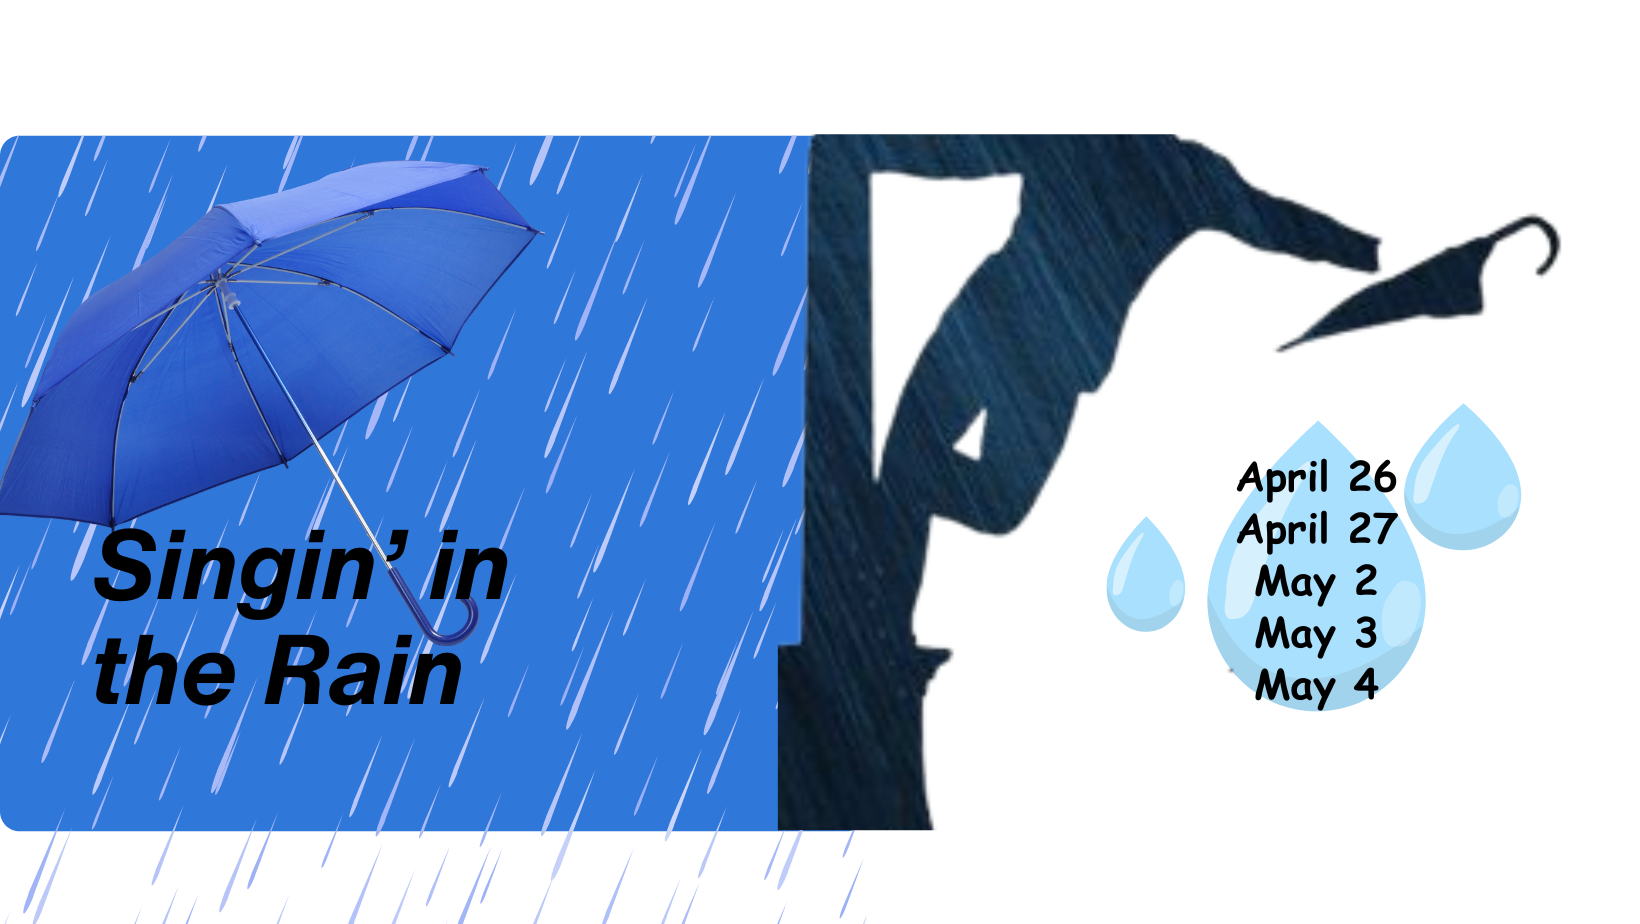 Performance of Singin in the Rain will be wet and wild